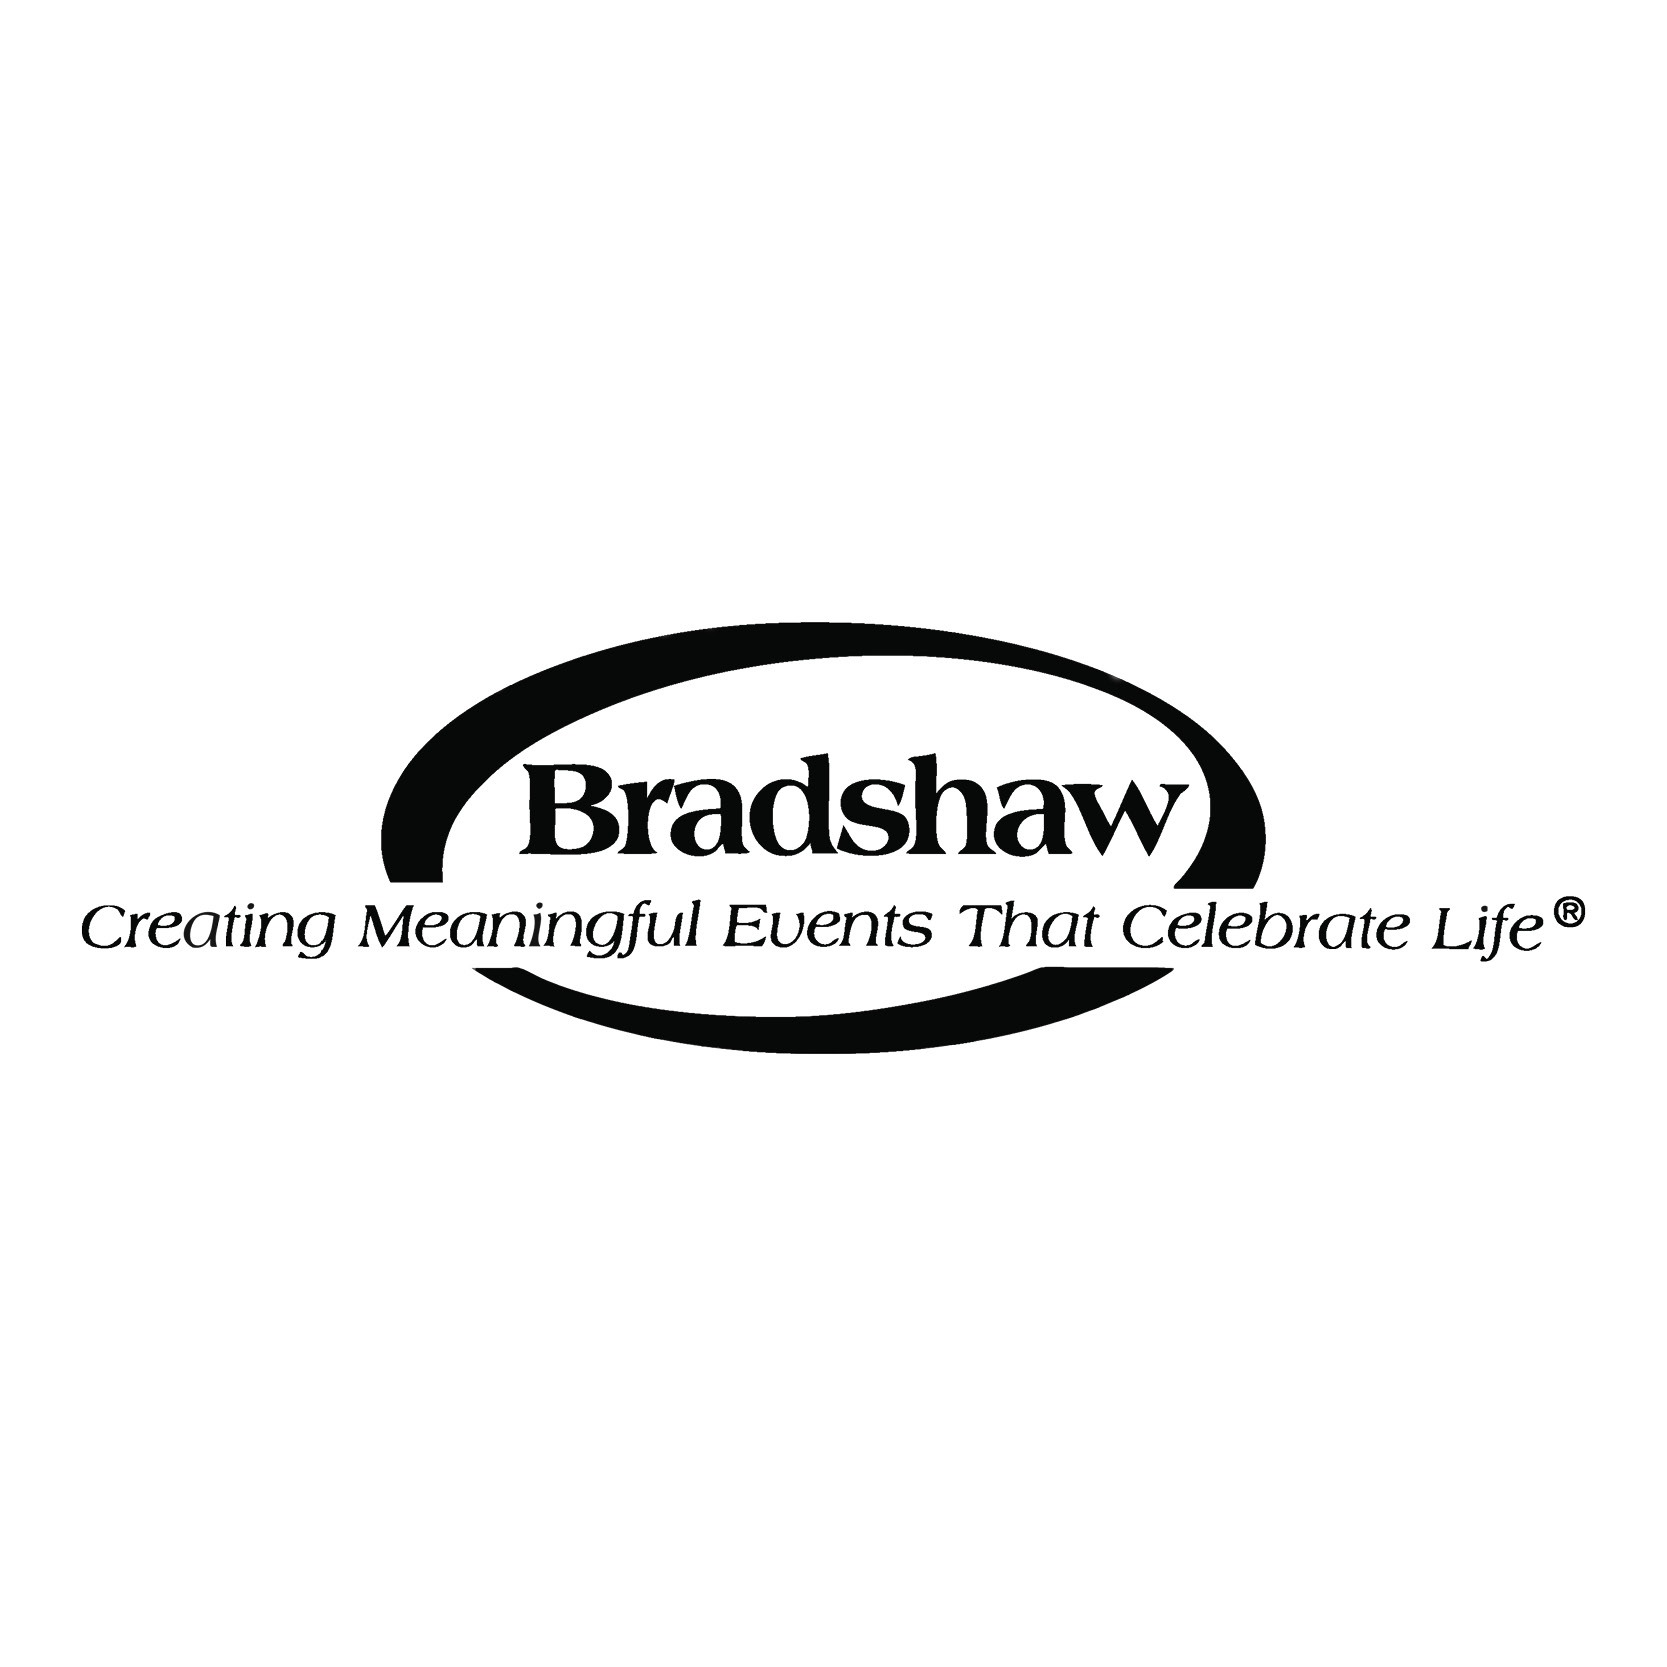 Bradshaw Funeral & Cremation Services & Celebration of Life - White Bear Lake, MN 55127 - (651)407-8300 | ShowMeLocal.com